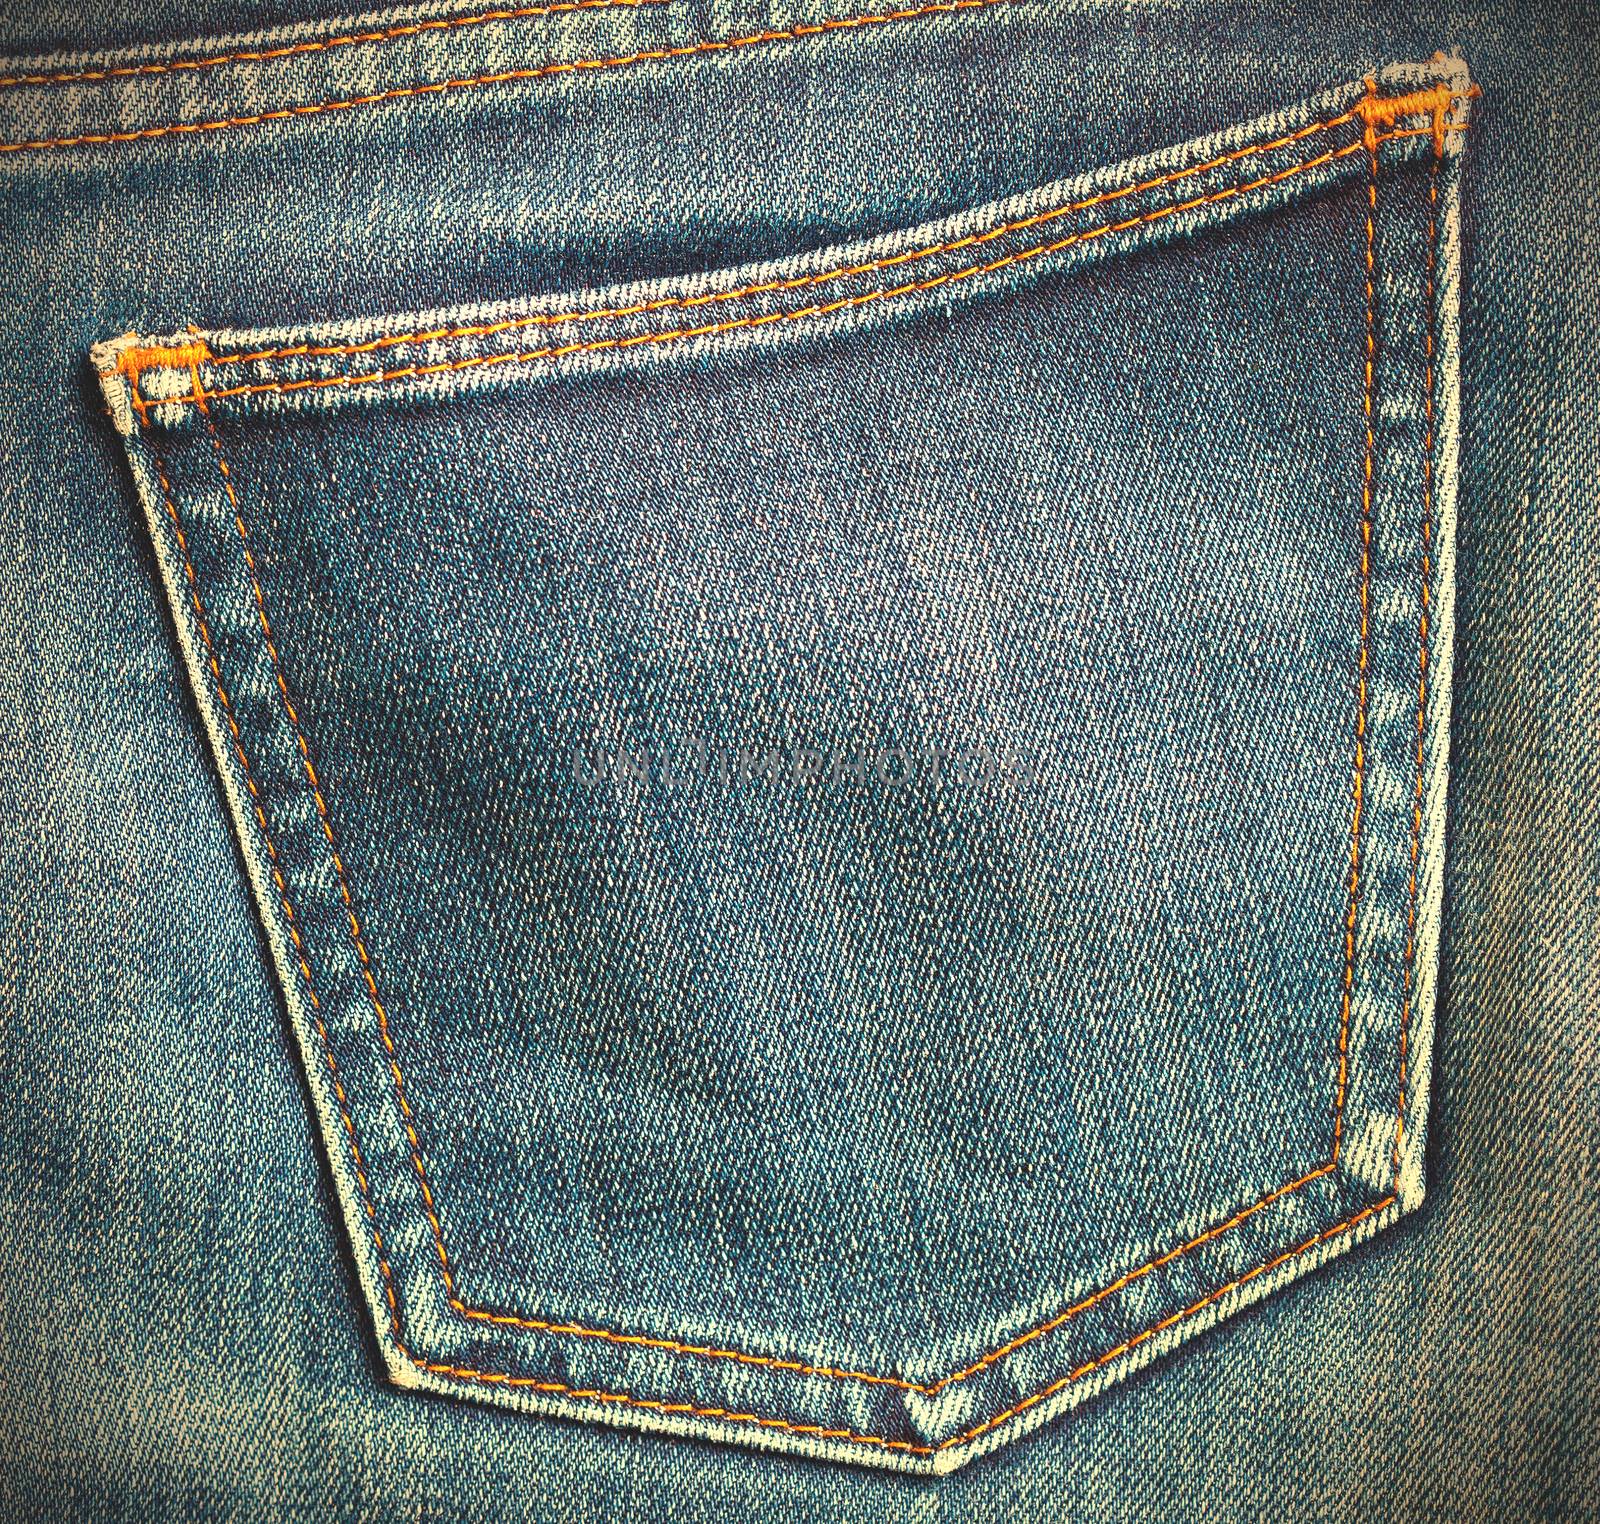 jeans pocket by Astroid